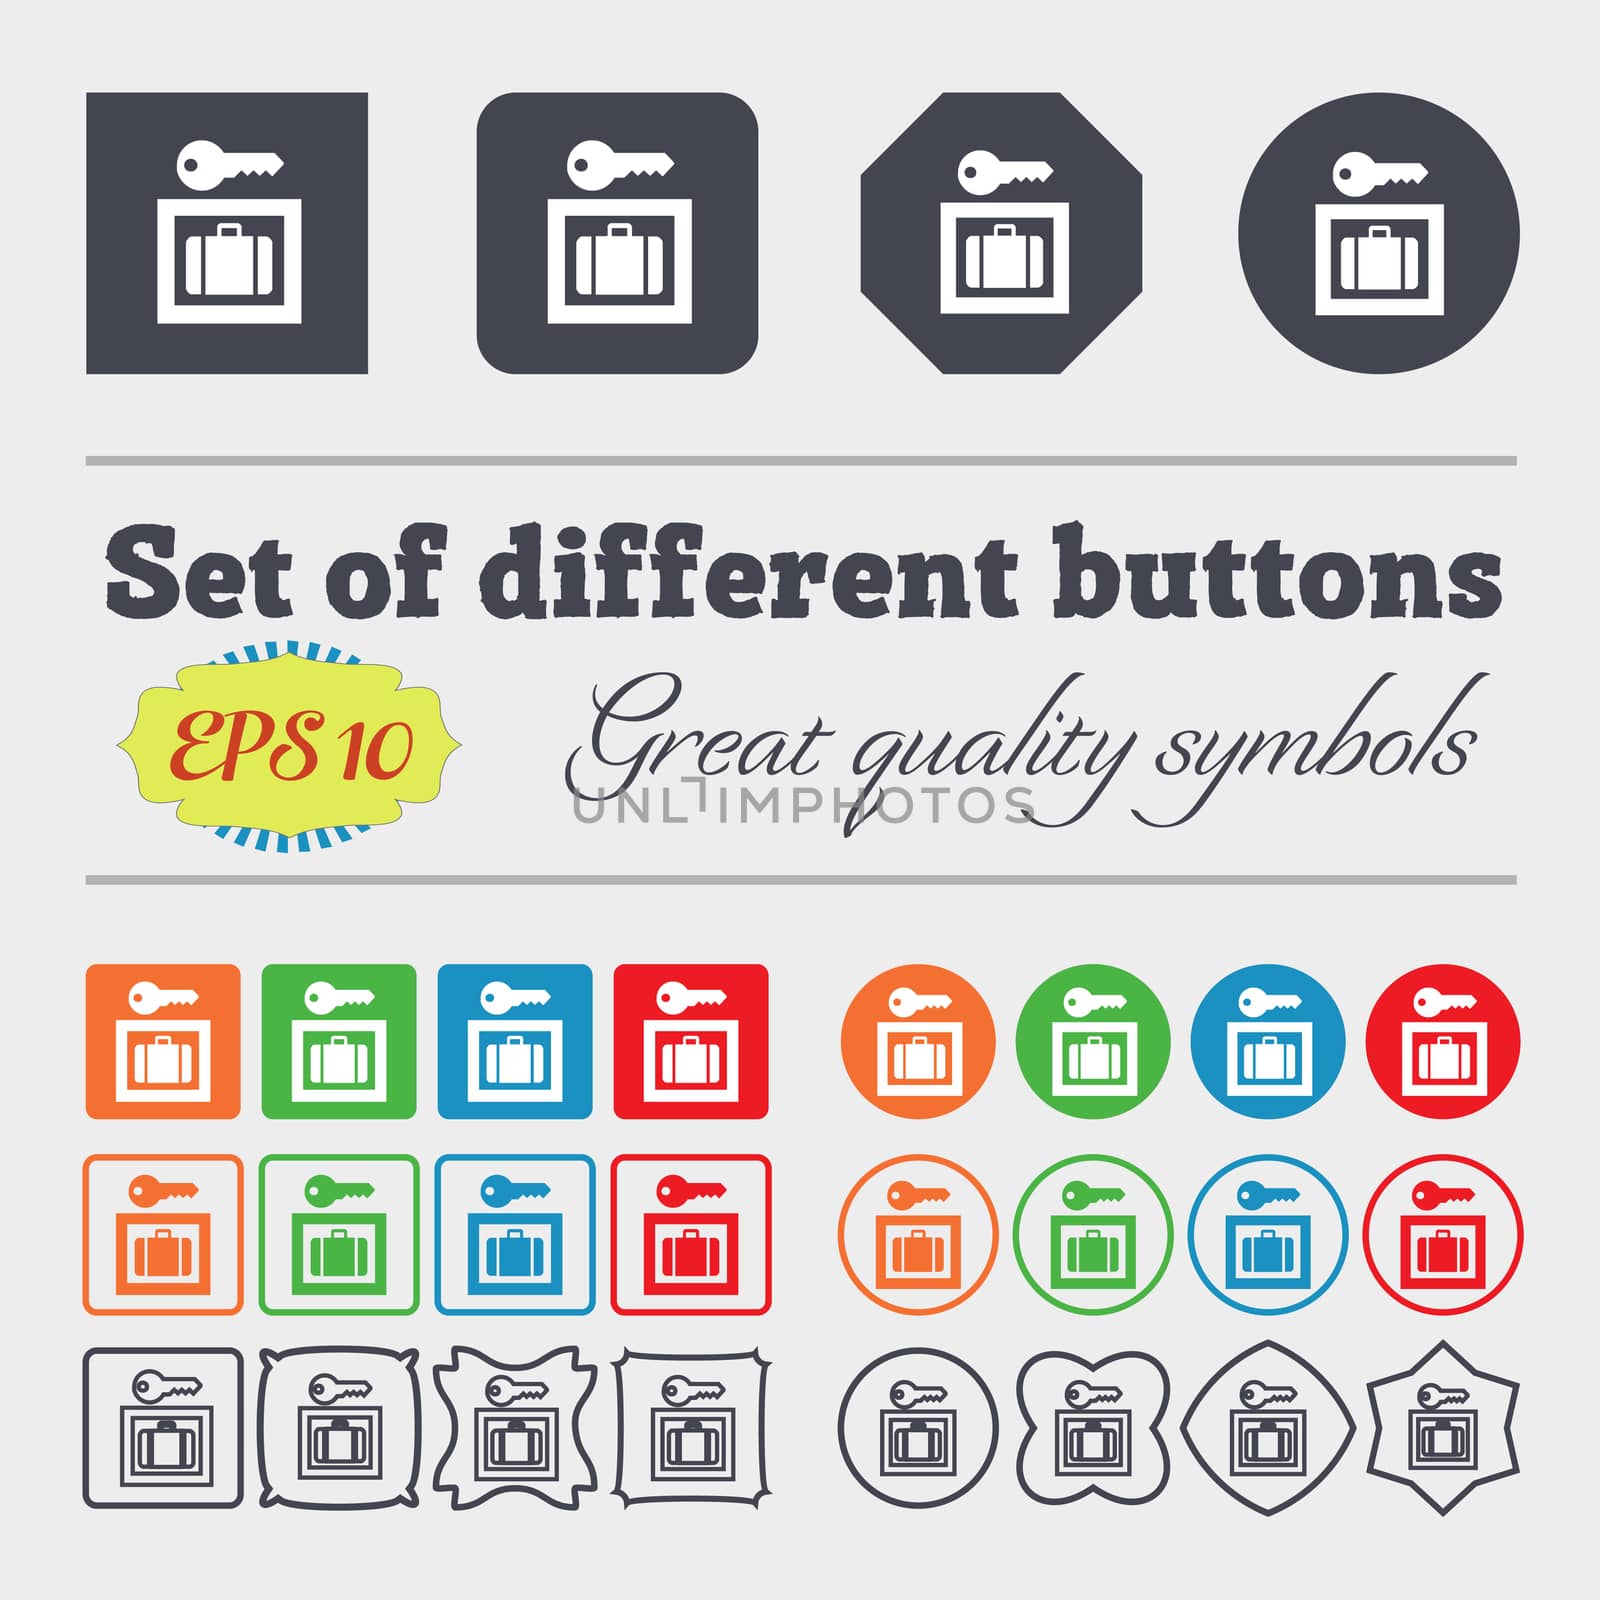 Luggage Storage icon sign. Big set of colorful, diverse, high-quality buttons. illustration